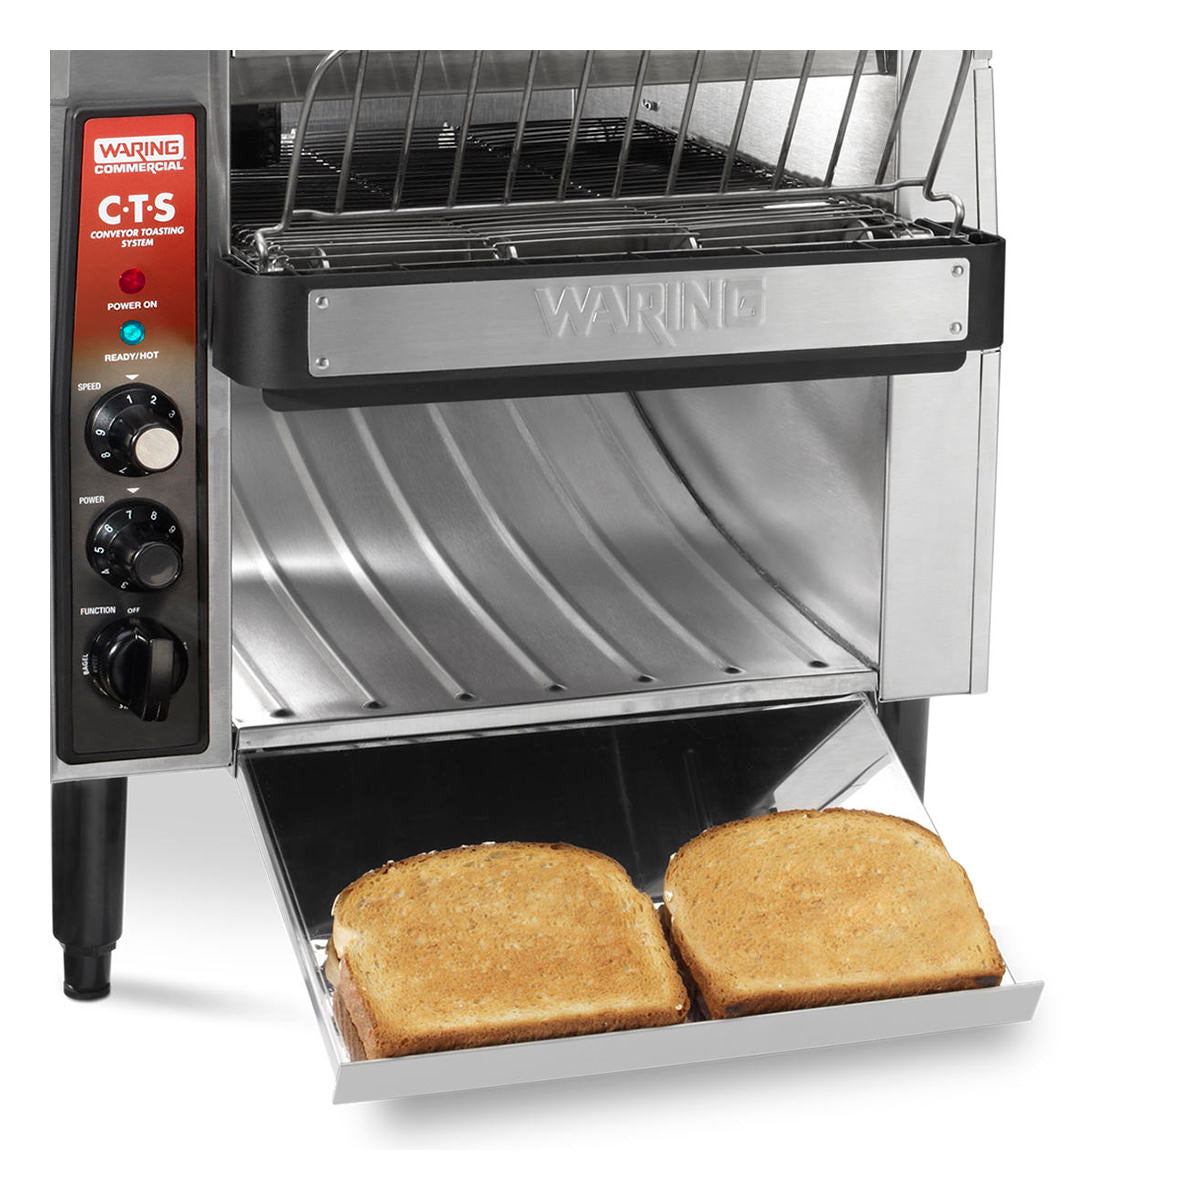 CTS1000CND Commercial Conveyor Toasting System by Waring Commercial